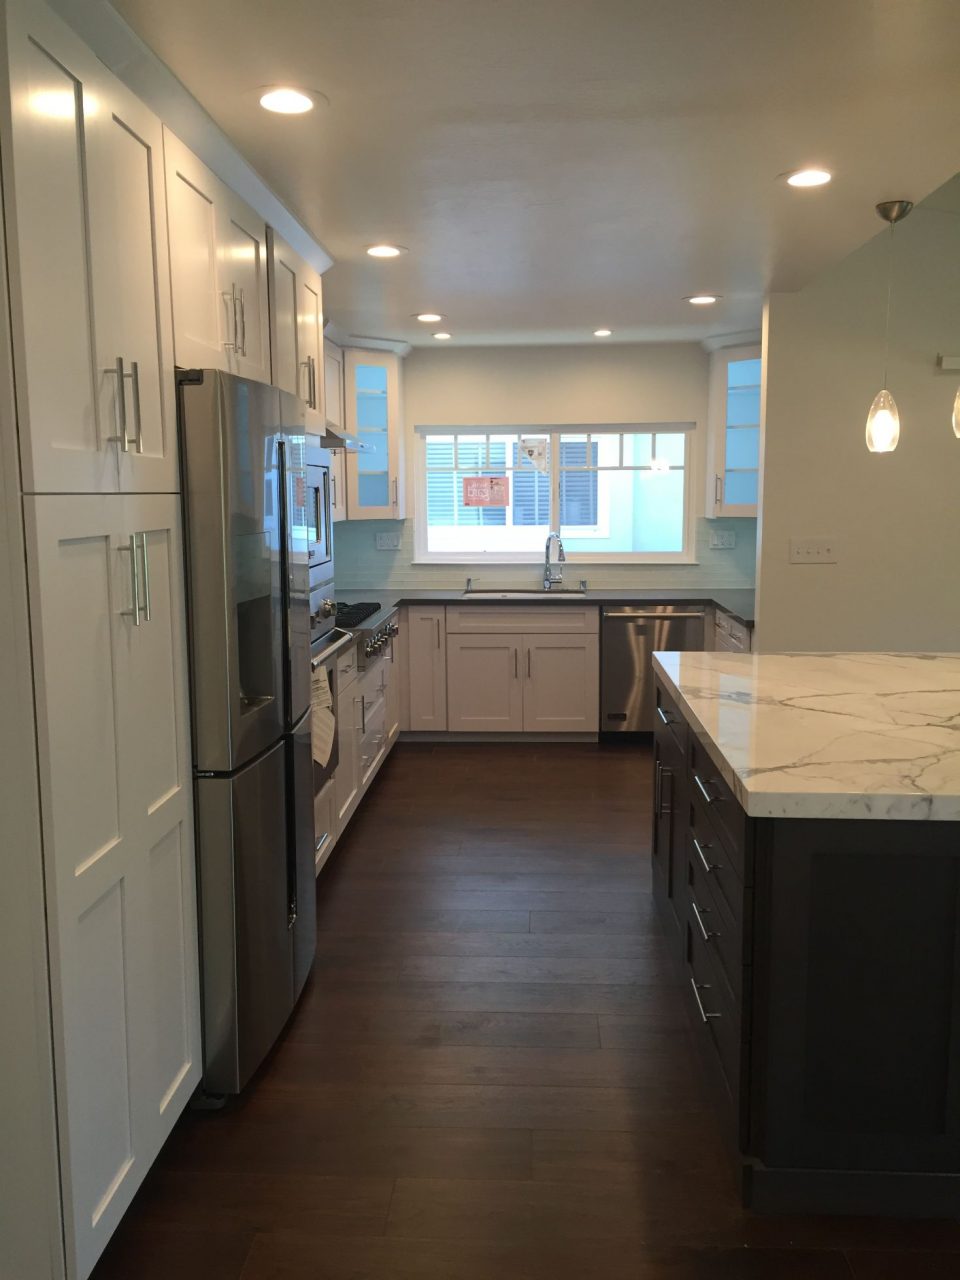 kITCHEN rEMODELING COMPANY contractor